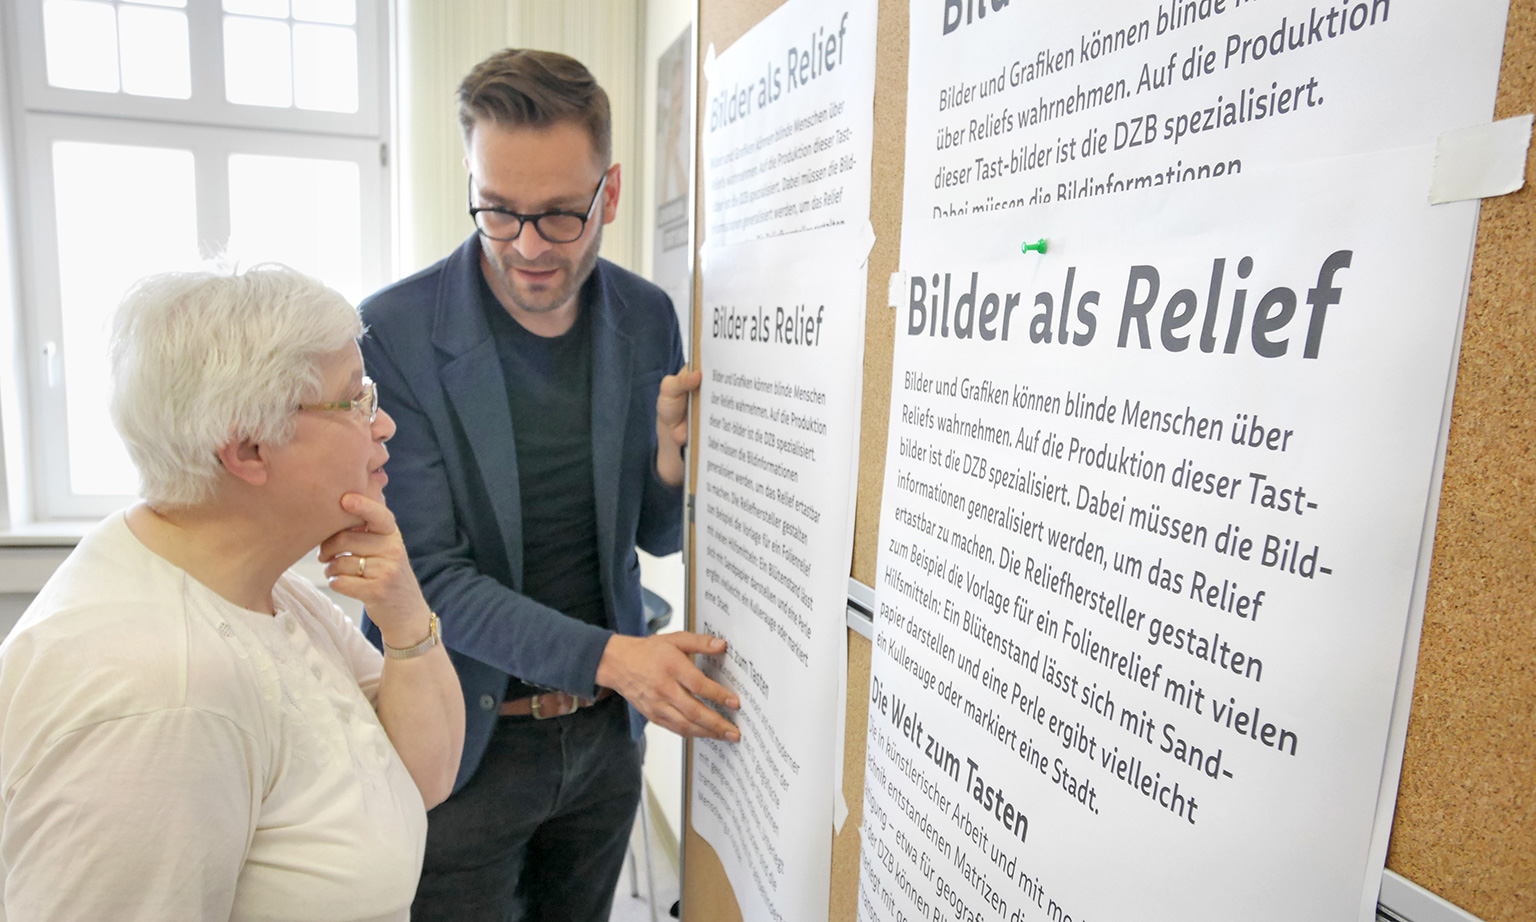 Photo from a focus group meeting on font legibility. Gregor Strutz in conversation with an elderly woman from the focus group. They are standing together in front of a large board with text pinned to it in different font sizes.